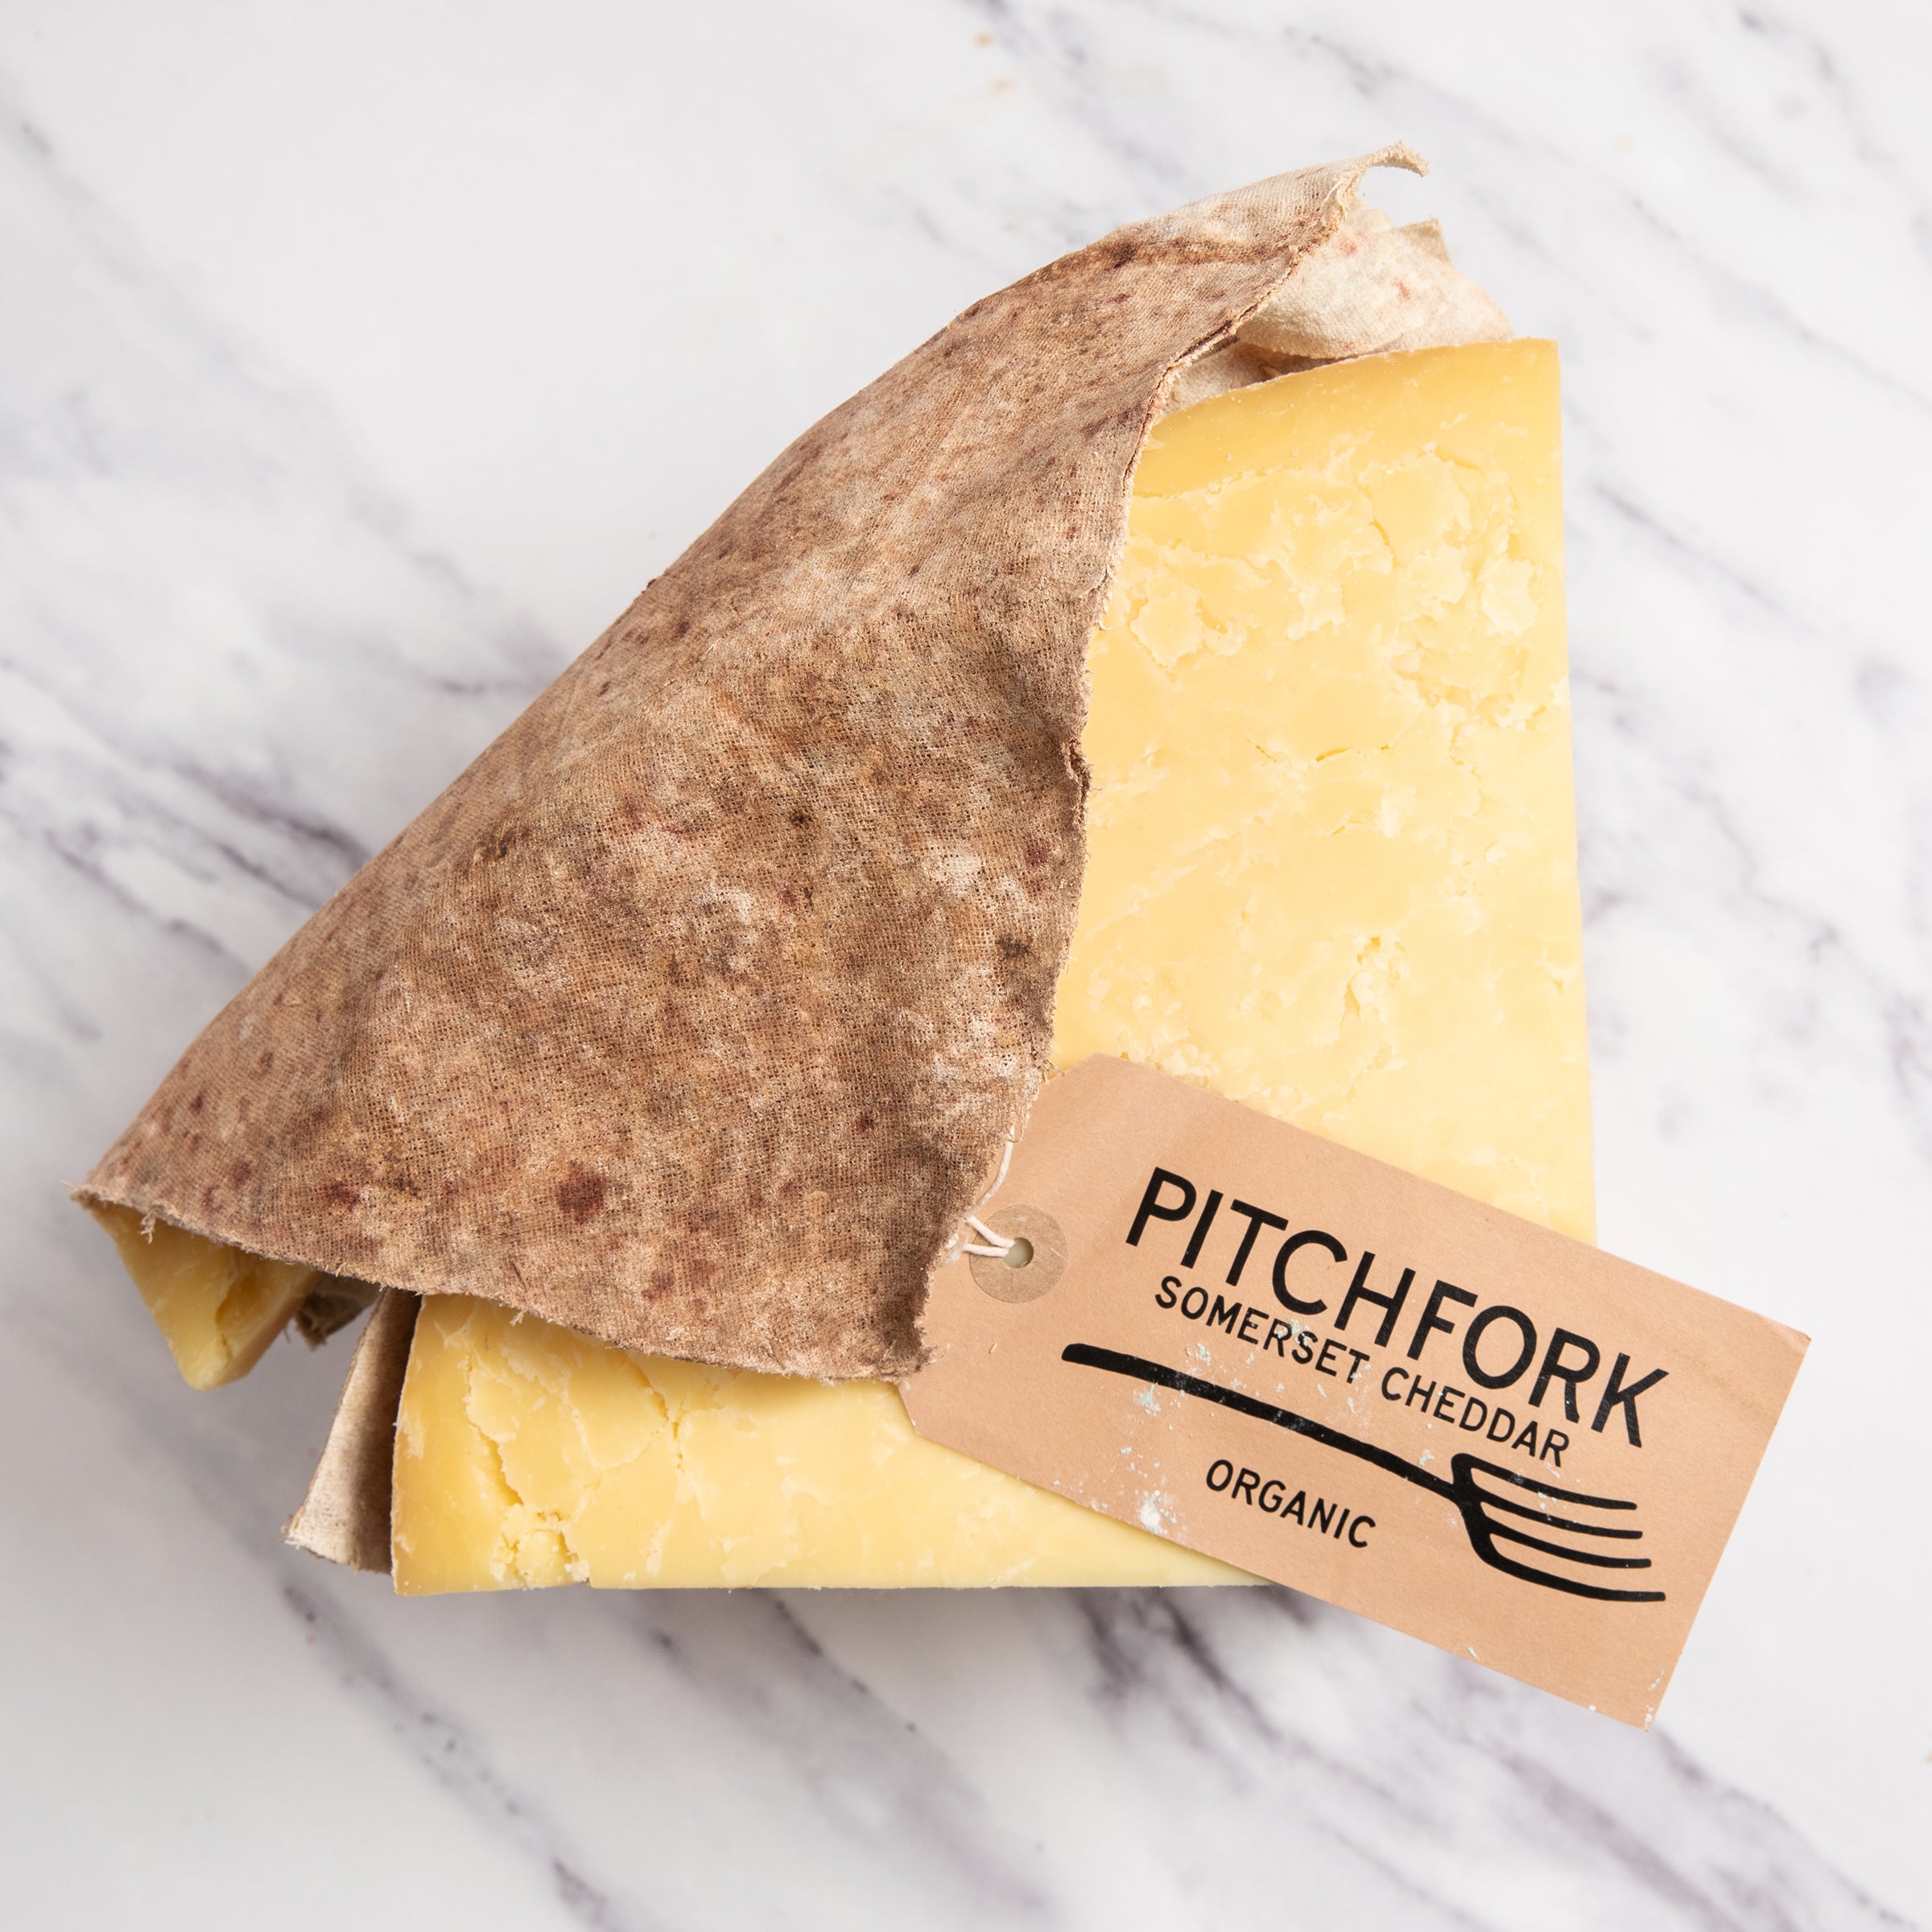 Pitchfork Somerset Cloth Wrapped Cheddar Cheese